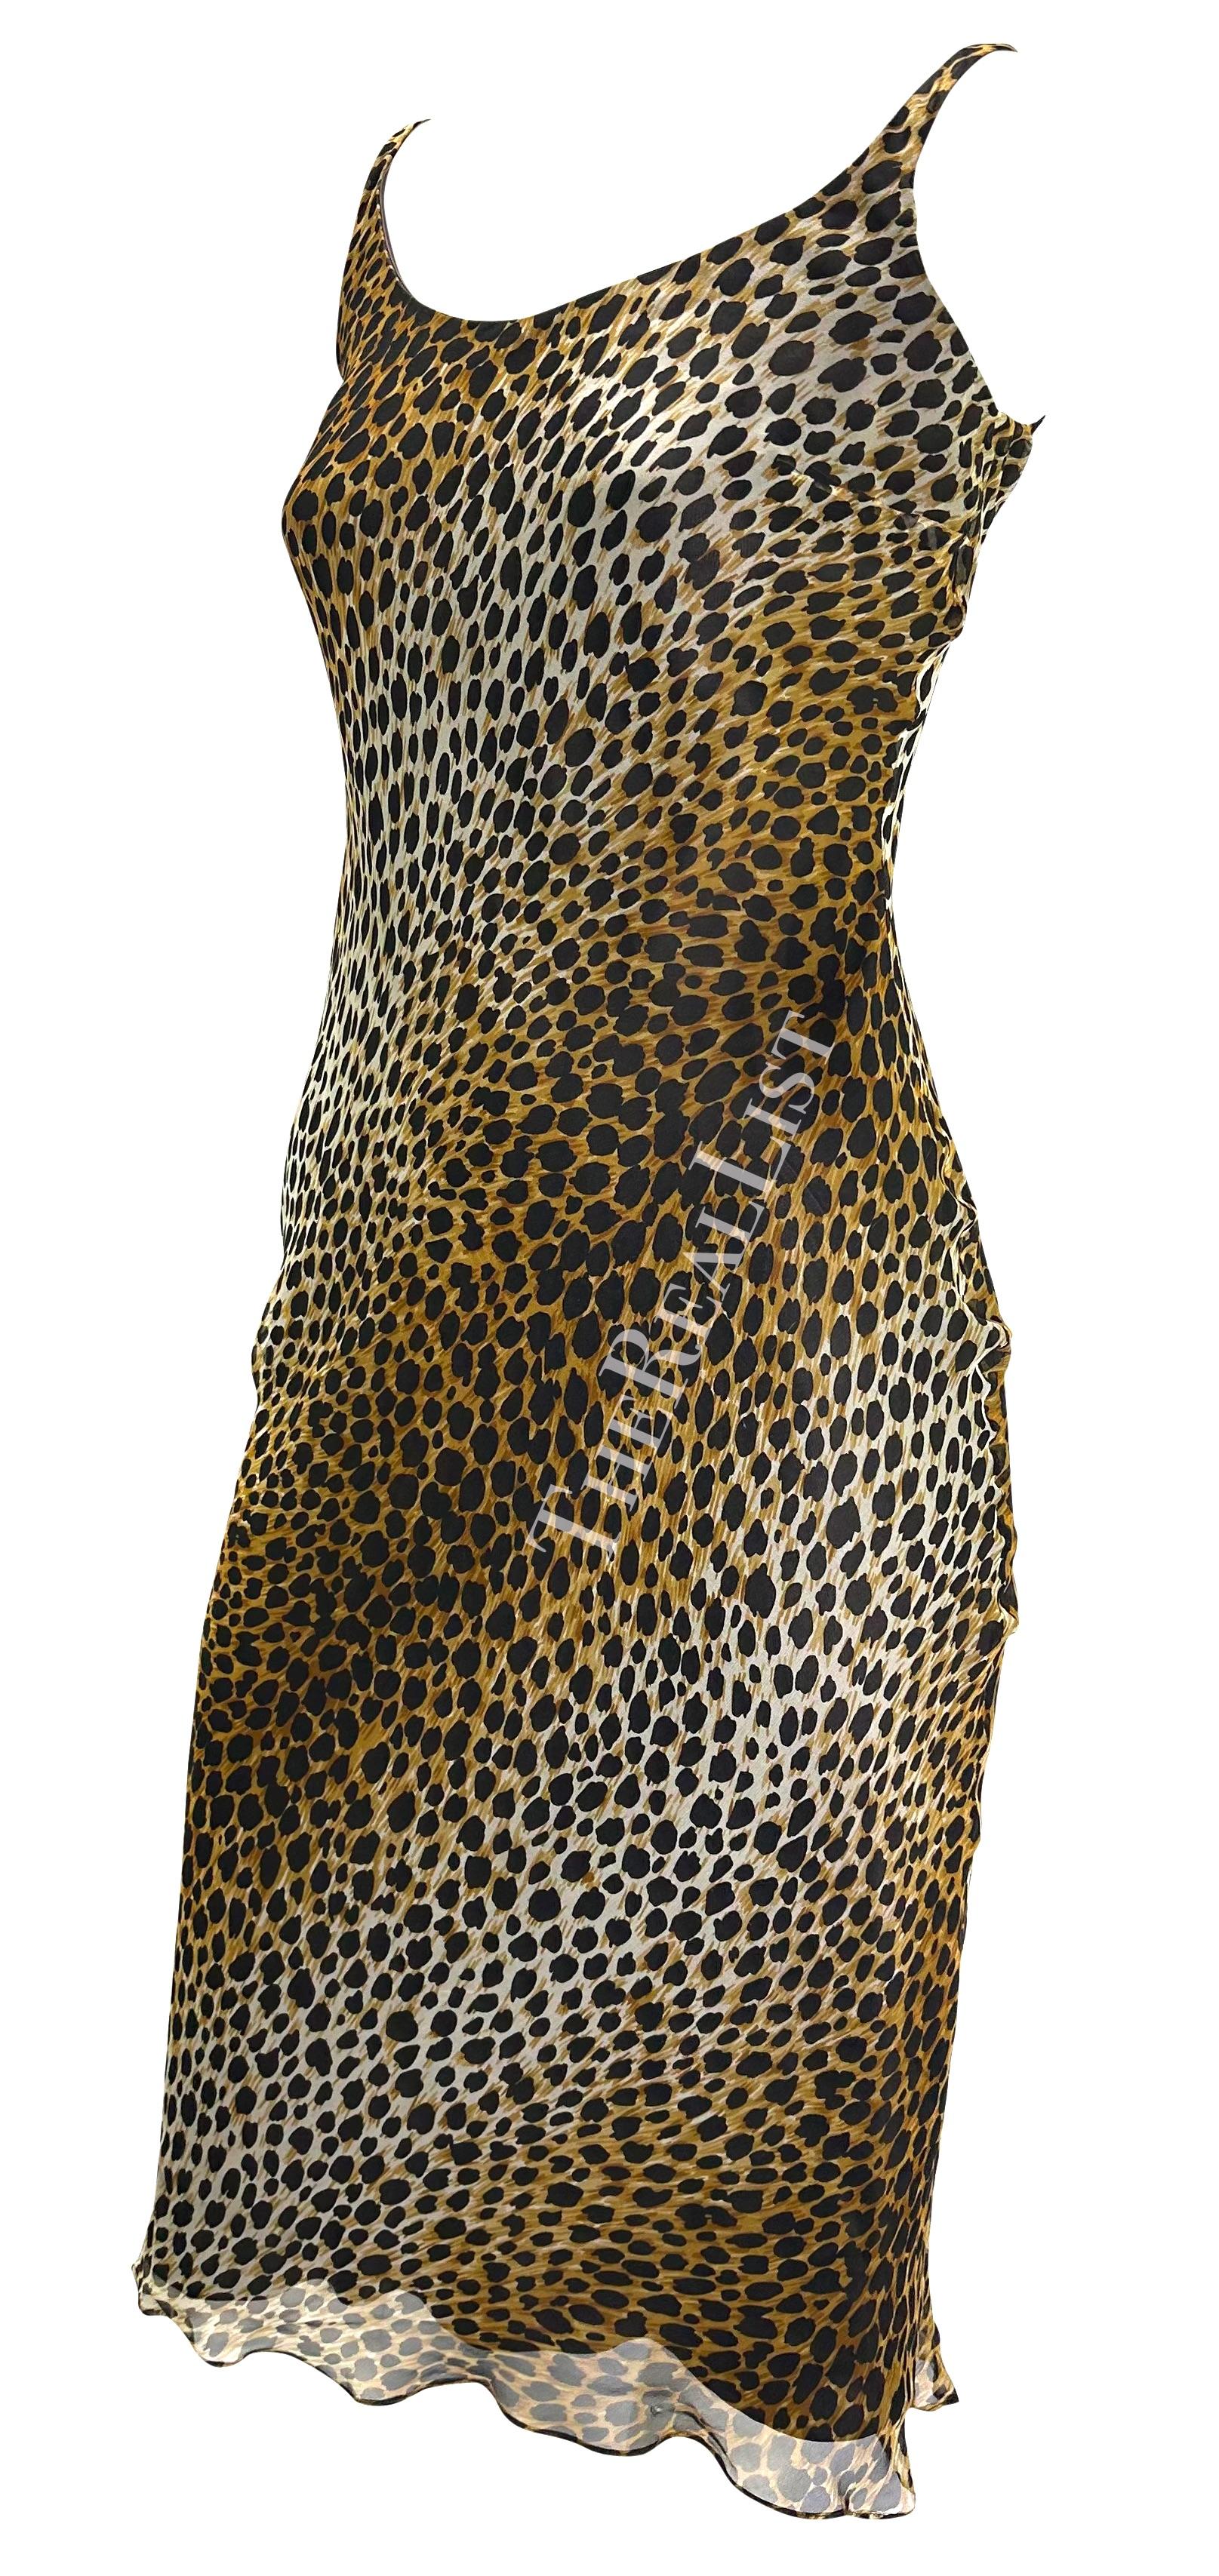 Presenting a beautiful ombre cheetah print Dolce and Gabbana slip dress. From the mid-1990s, this dress features a wide scoop neckline and thin straps. The dress is made complete with a thin chiffon overlay. 

Approximate measurements:
Size -